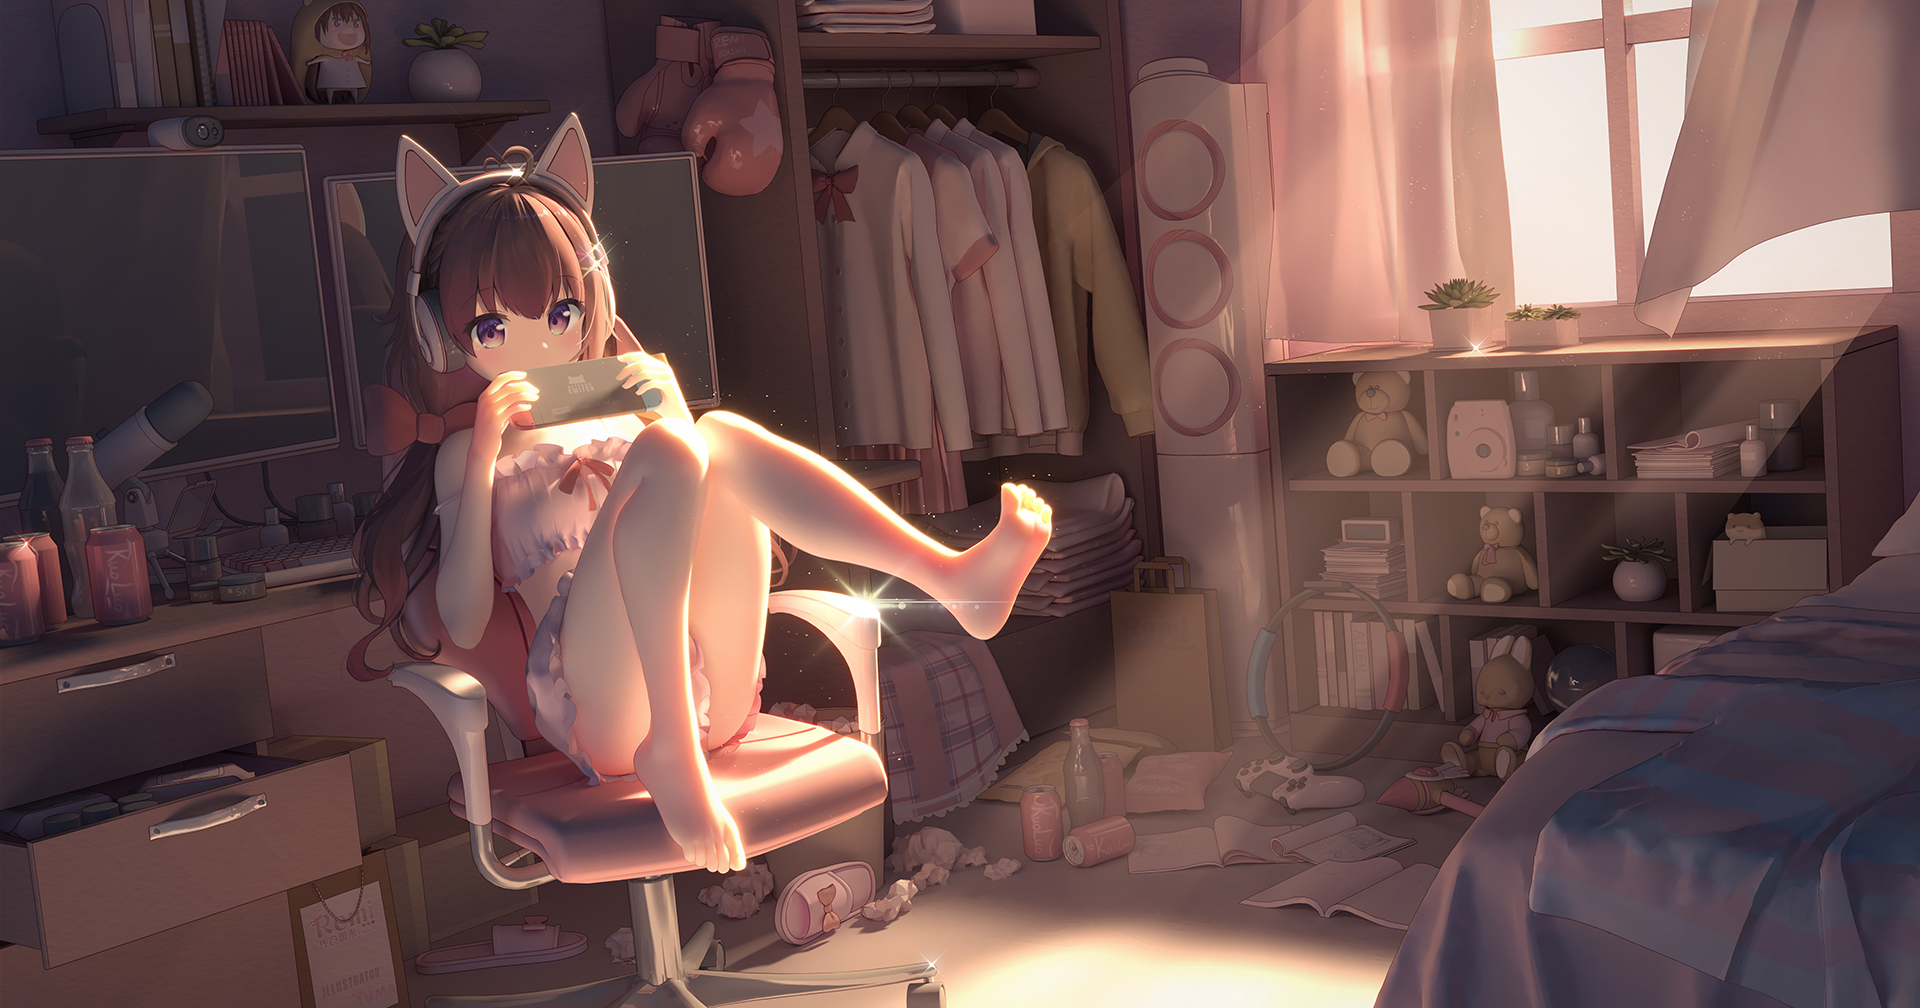 Anime 1920x1008 anime anime girls sitting looking at viewer indoors women indoors teddy bears sunlight window curtains bent legs Nintendo Switch headphones long hair hair ribbon monitor brunette purple eyes consoles microphone keyboards desk can bedroom sunset glow clothes sunset bed boxing gloves computer controllers cabinets thighs drink messy lingerie covering mouth armchair bag